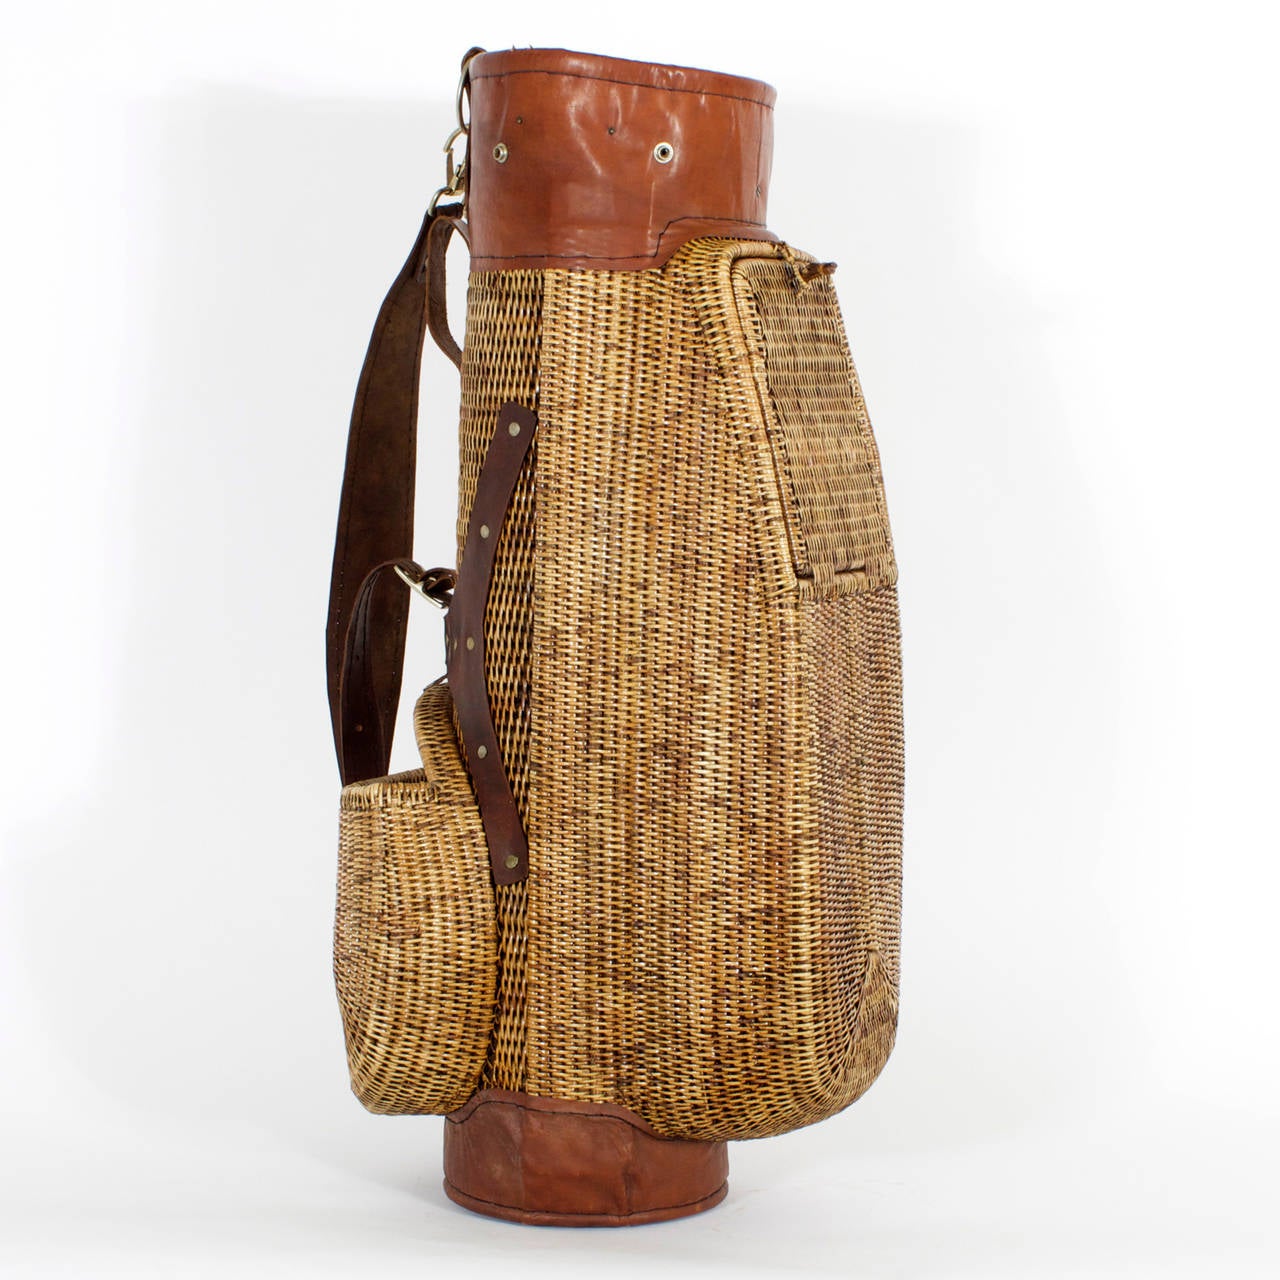 Vintage wicker golf bag ripe with patina. Featuring woven wicker lidded compartment and leather accents and straps. All you need is knickers and high socks. A must have for the coolest of golfers.